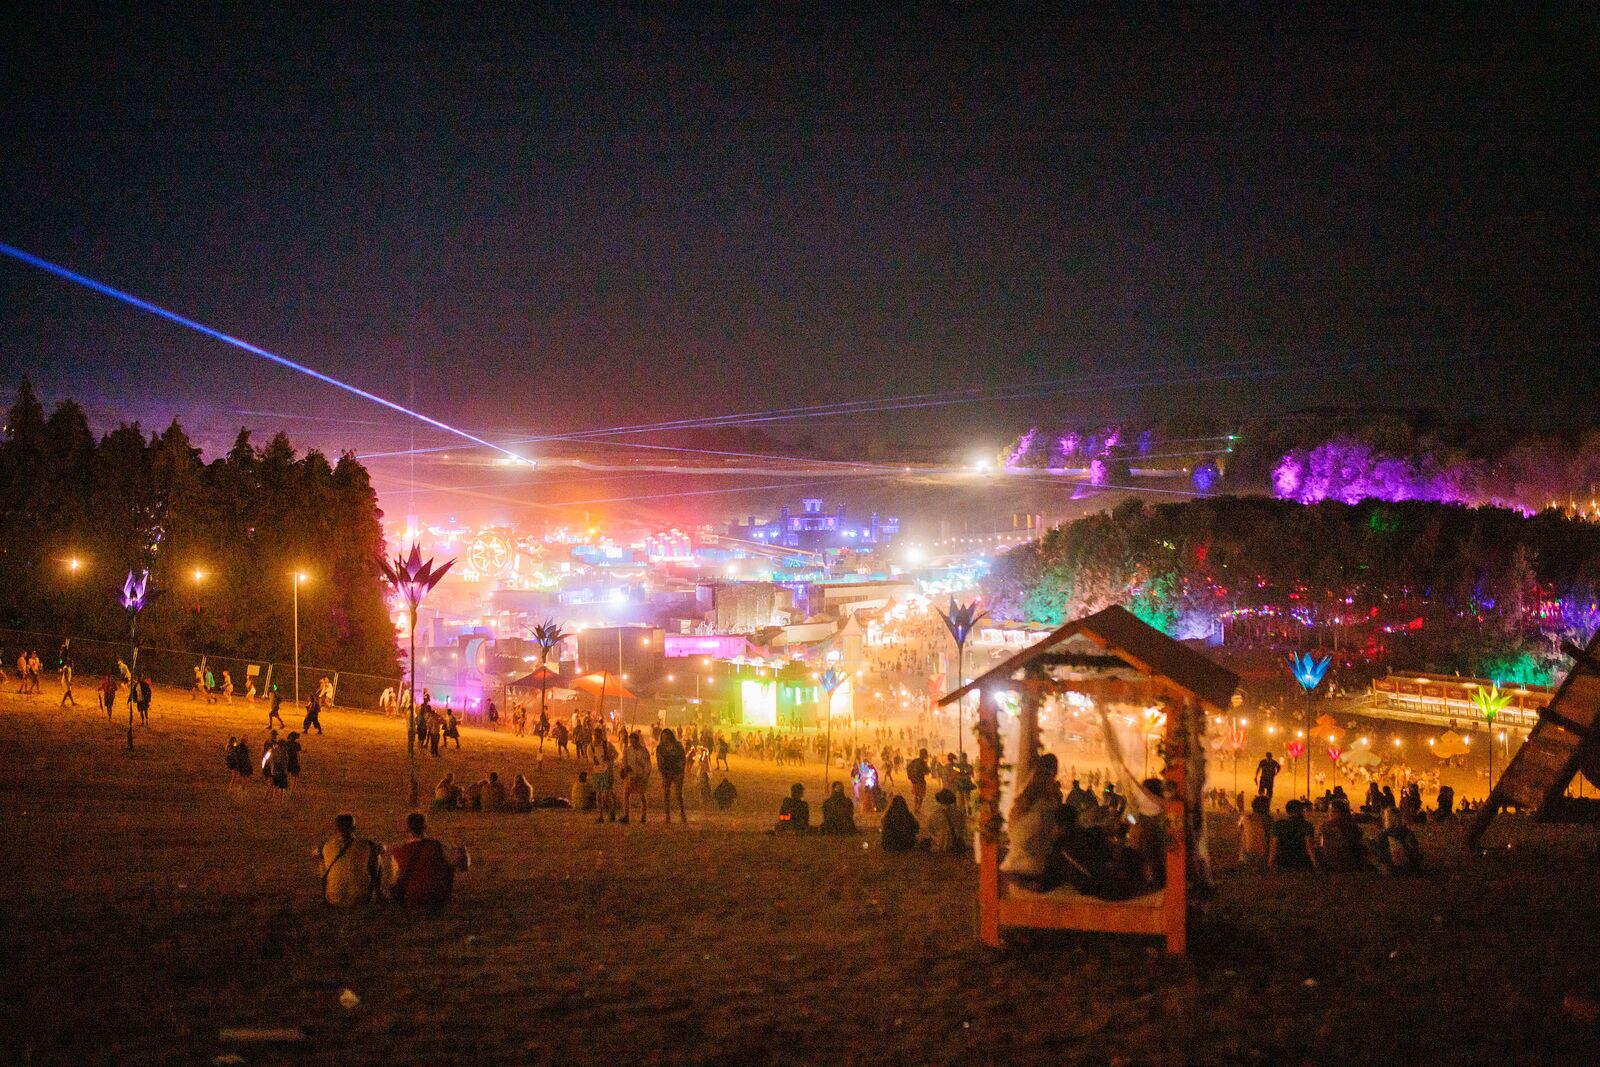 Boomtown 'The Gathering'